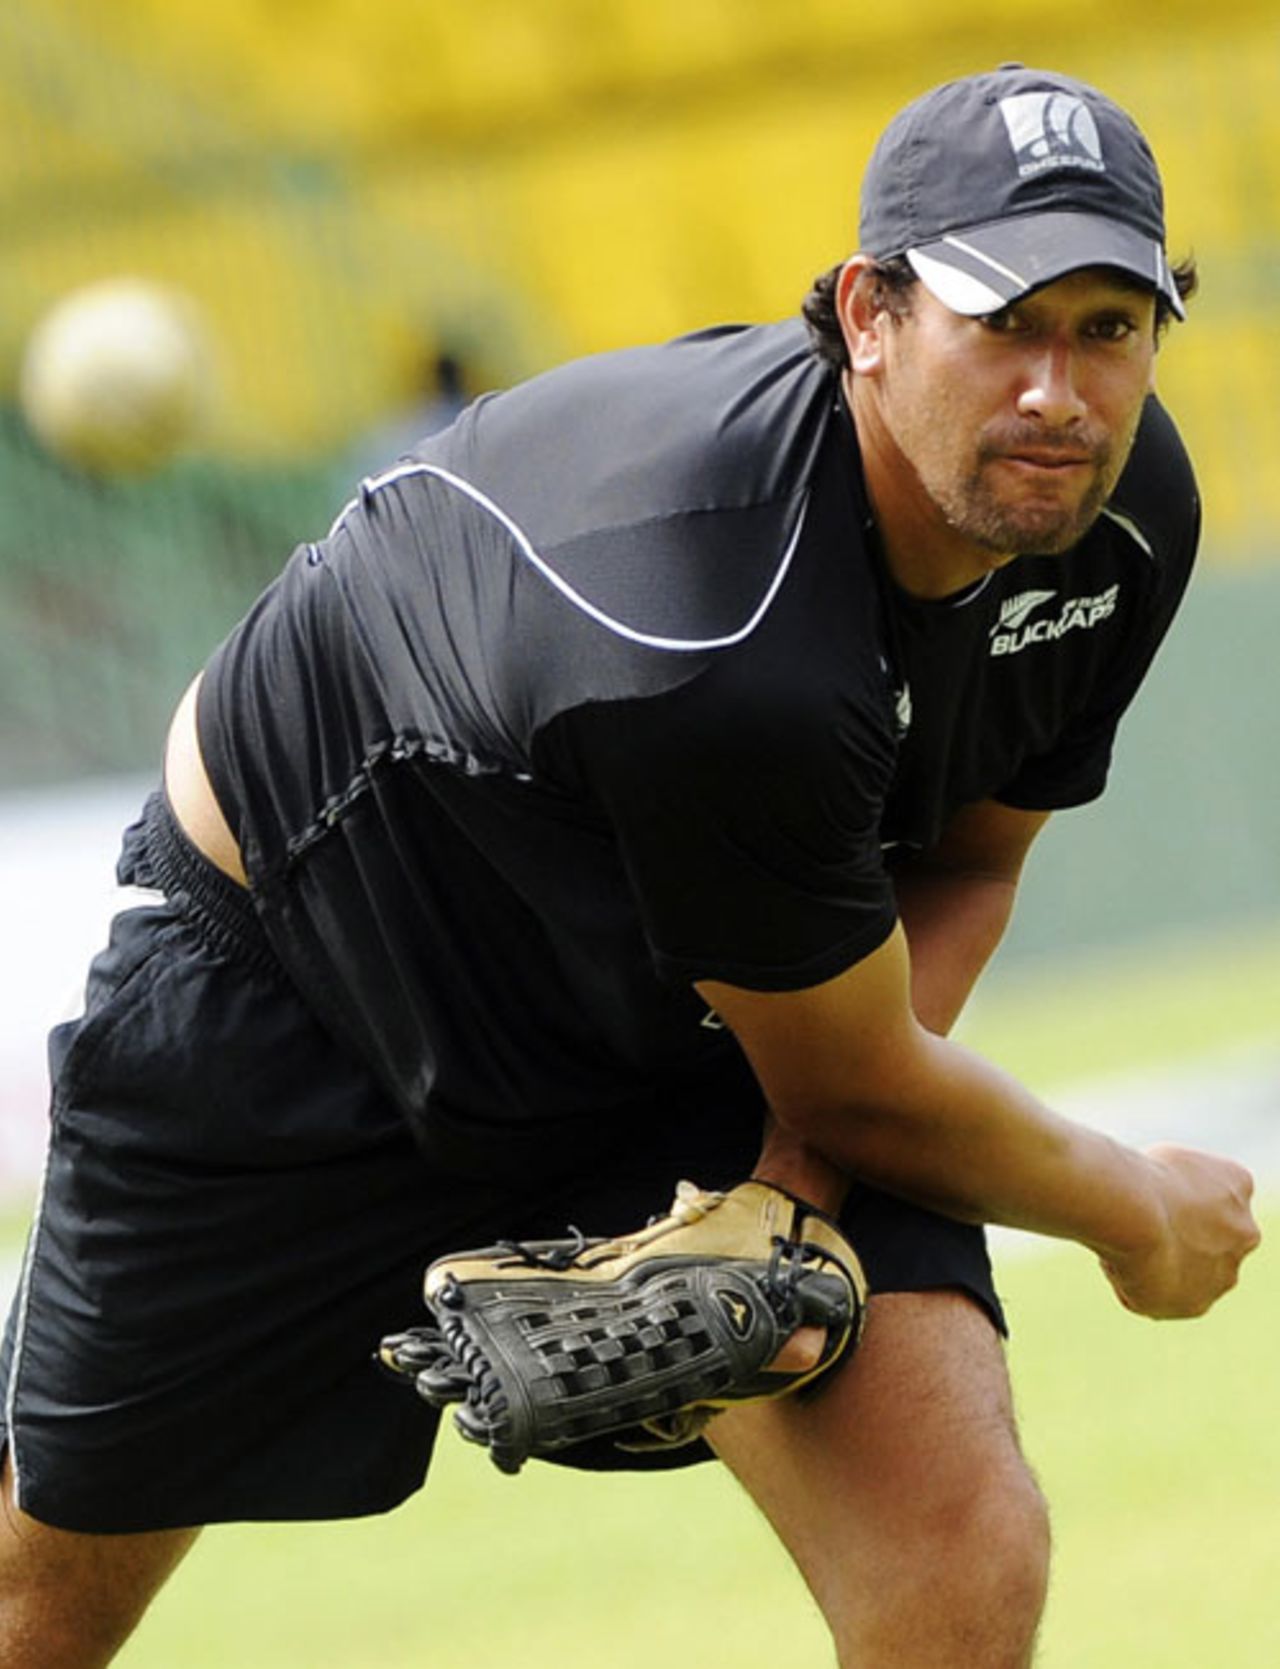 Daryl Tuffey throws the ball during a training session, Colombo, September 7, 2009